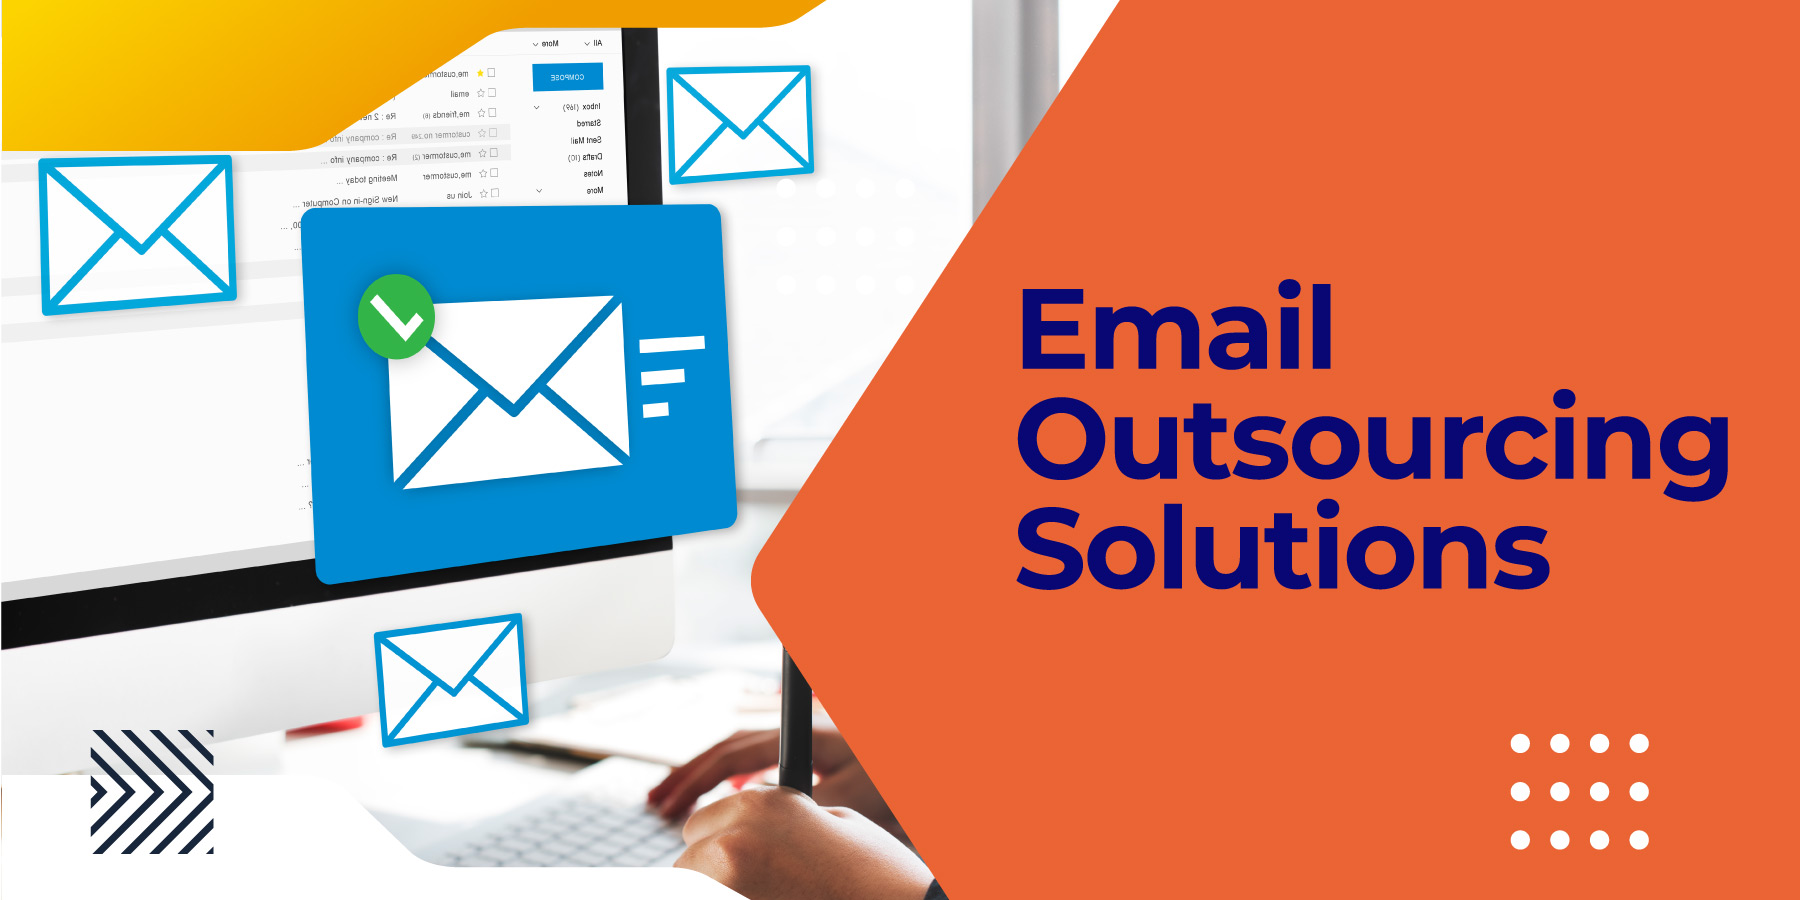 Email Outsourcing Solutions